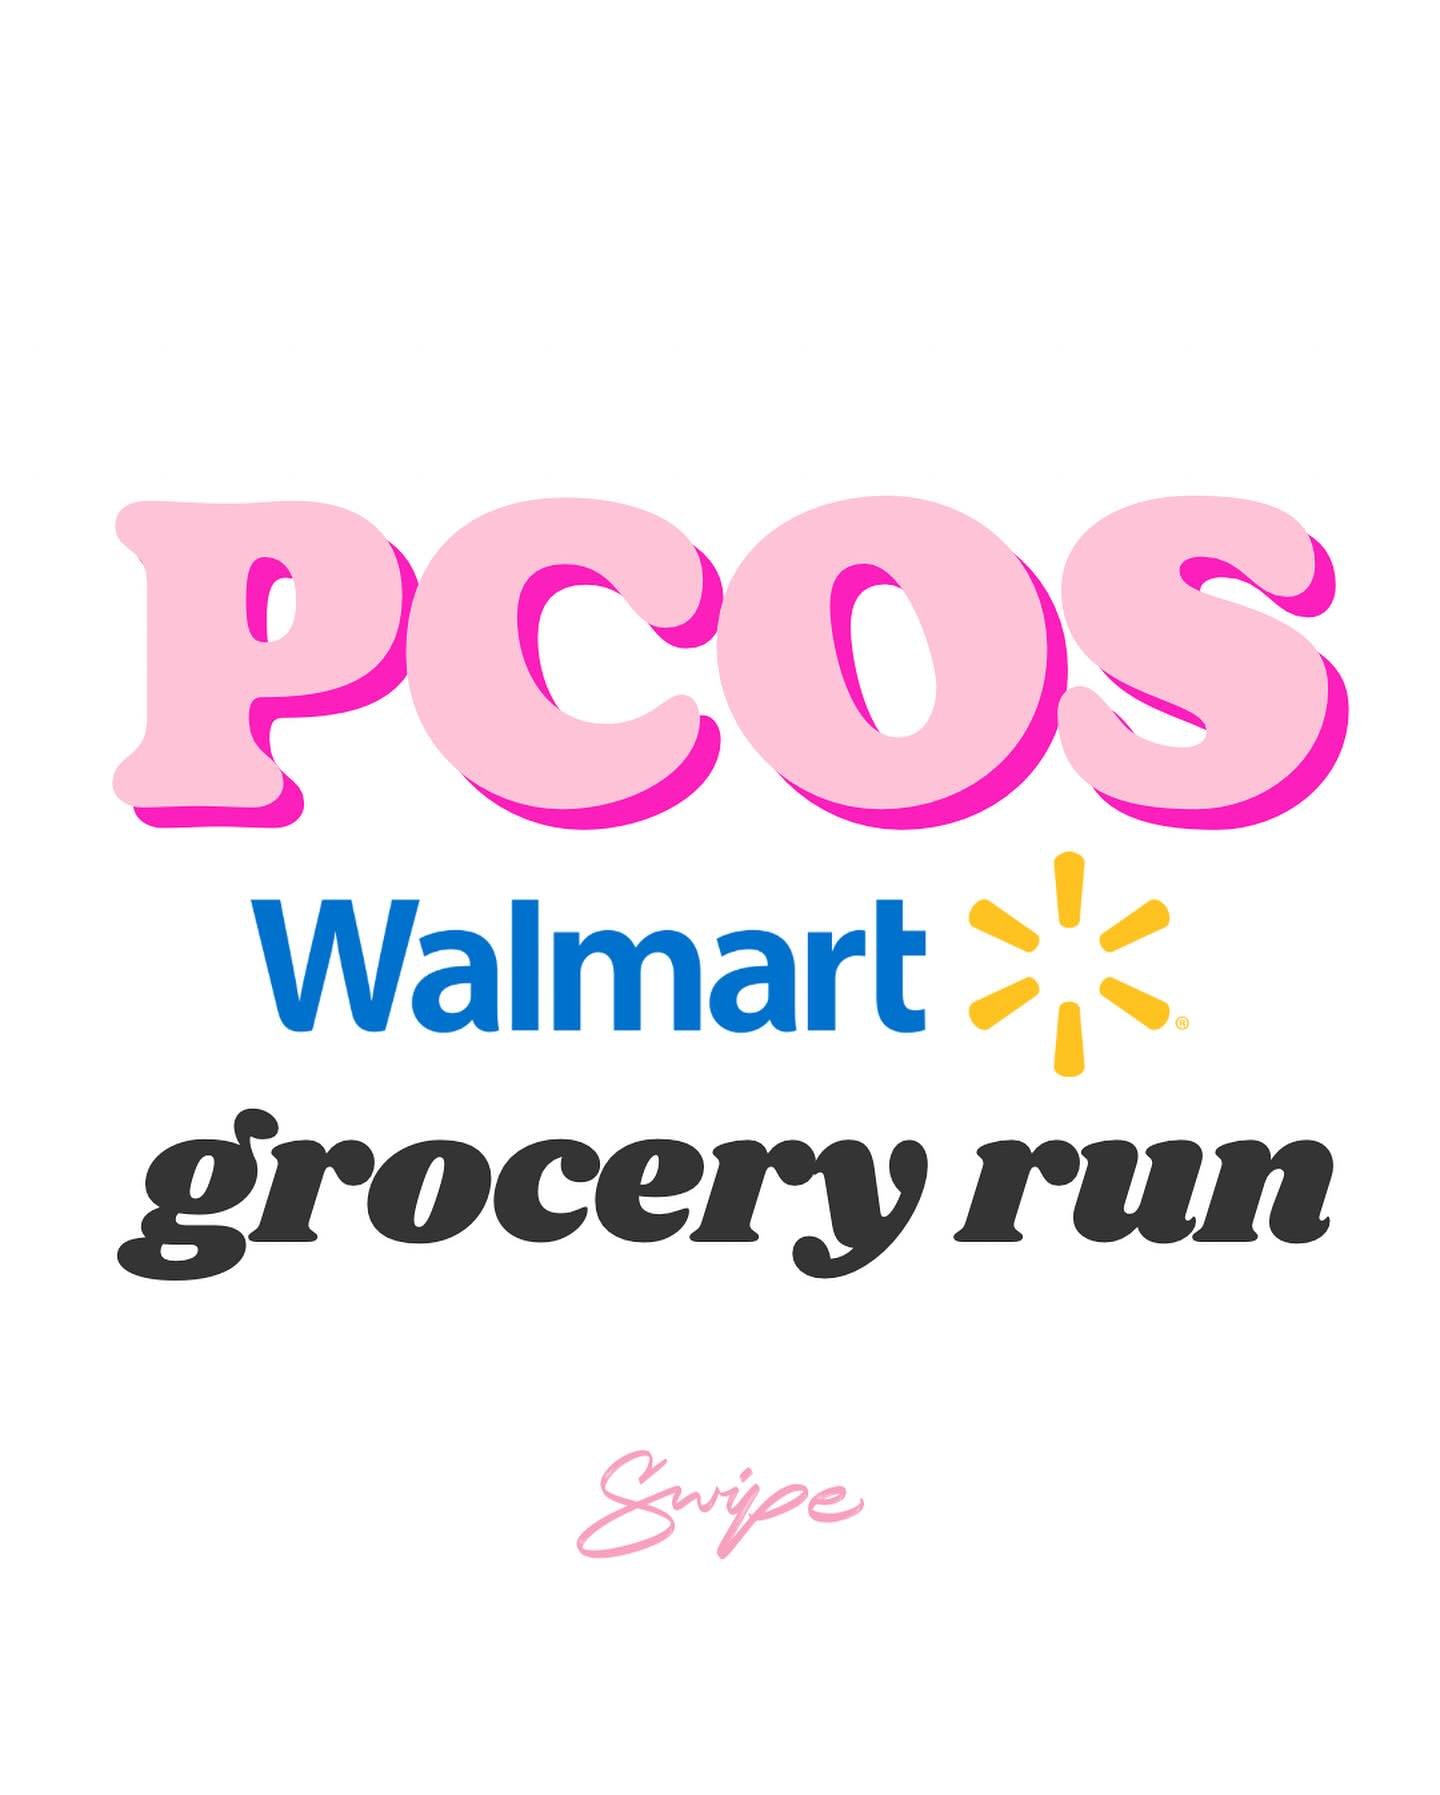 Do you want more grocery shopping help for your PCOS? LMK below ⬇️

Making this new quick + easy grocery series for all my PCOS cystas out there 💅🏼🥳 Here&rsquo;s my latest Walmart haul, and I really hope you find it useful!

If you&rsquo;re busy a